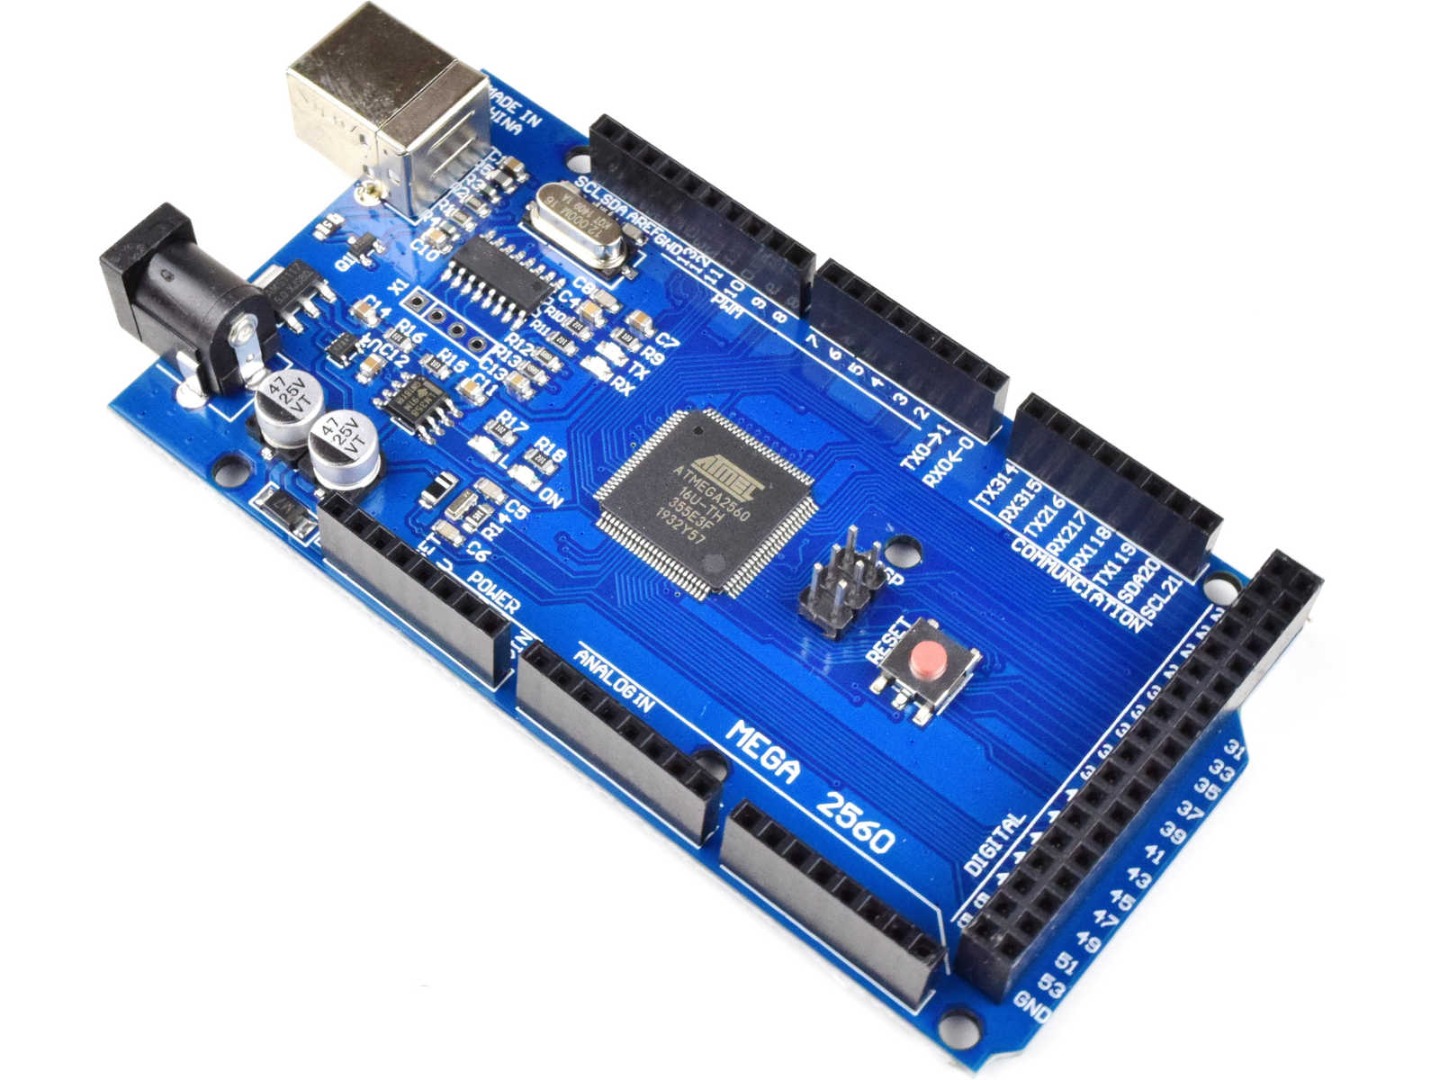 MEGA 2560 R3 module with Atmega2560 + CH340 USB (100% compatible with Arduino) 6